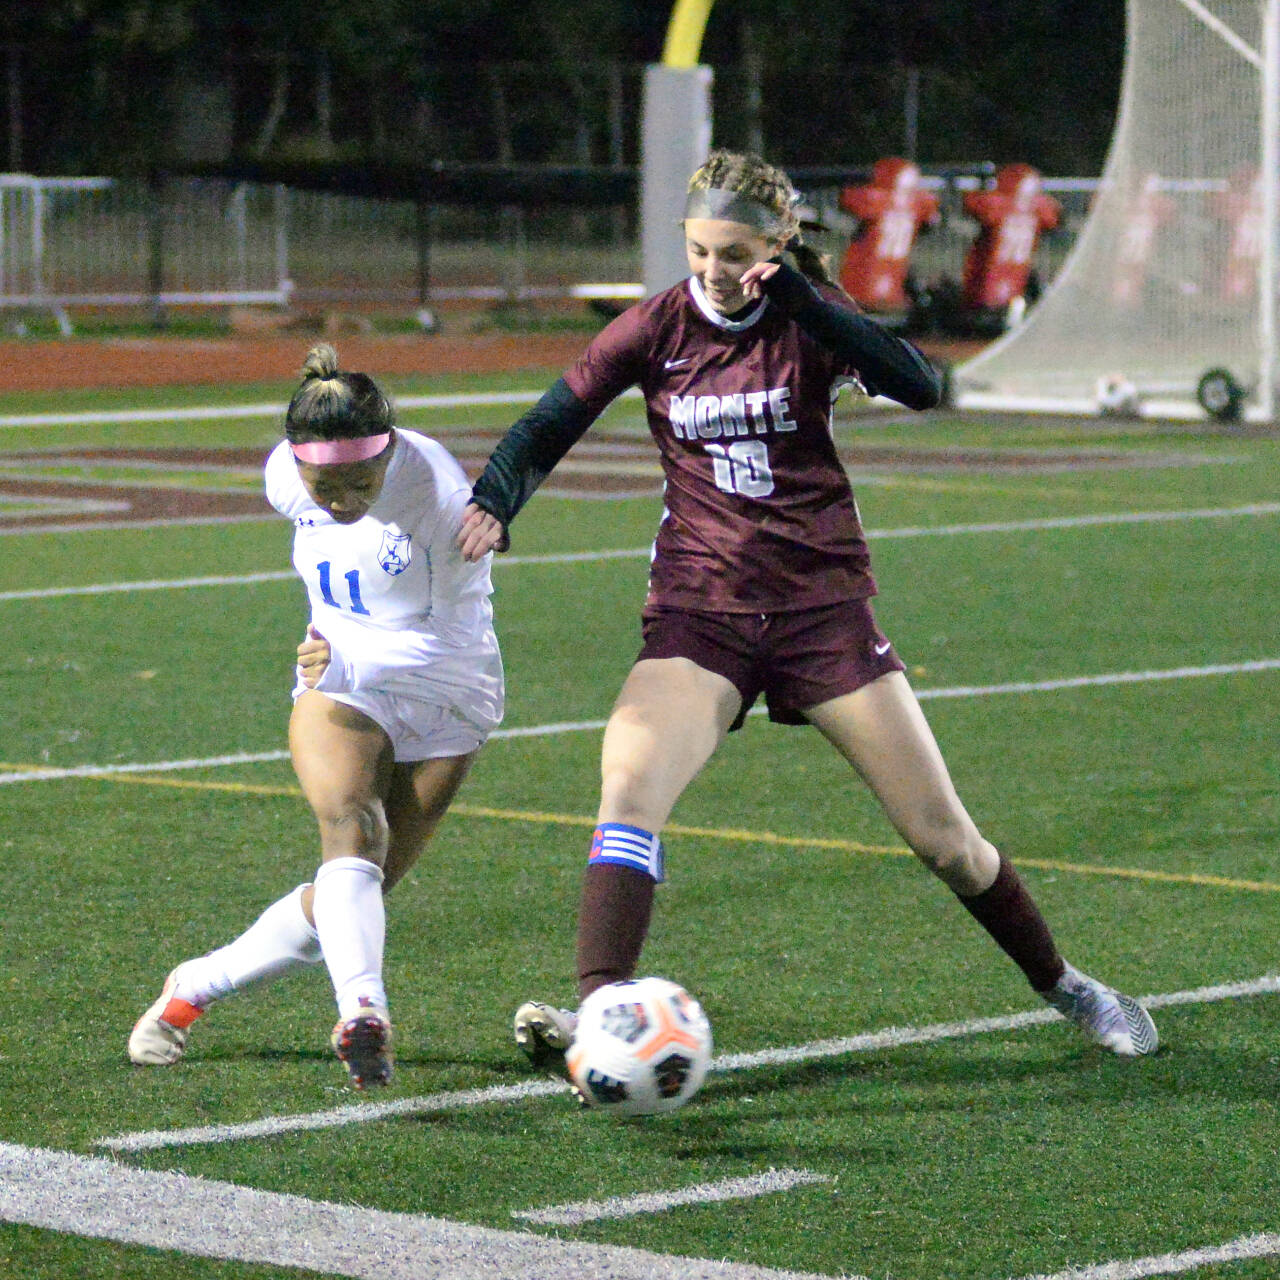 RYAN SPARKS / THE DAILY WORLD 
Montesano junior forward Mikayla Stanfield (10) and La Salle defender Cin Par compete for possession during the Bulldogs’ 3-1 victory in a 1A State first-round playoff game on Wednesday at Jack Rottle Field in Montesano.